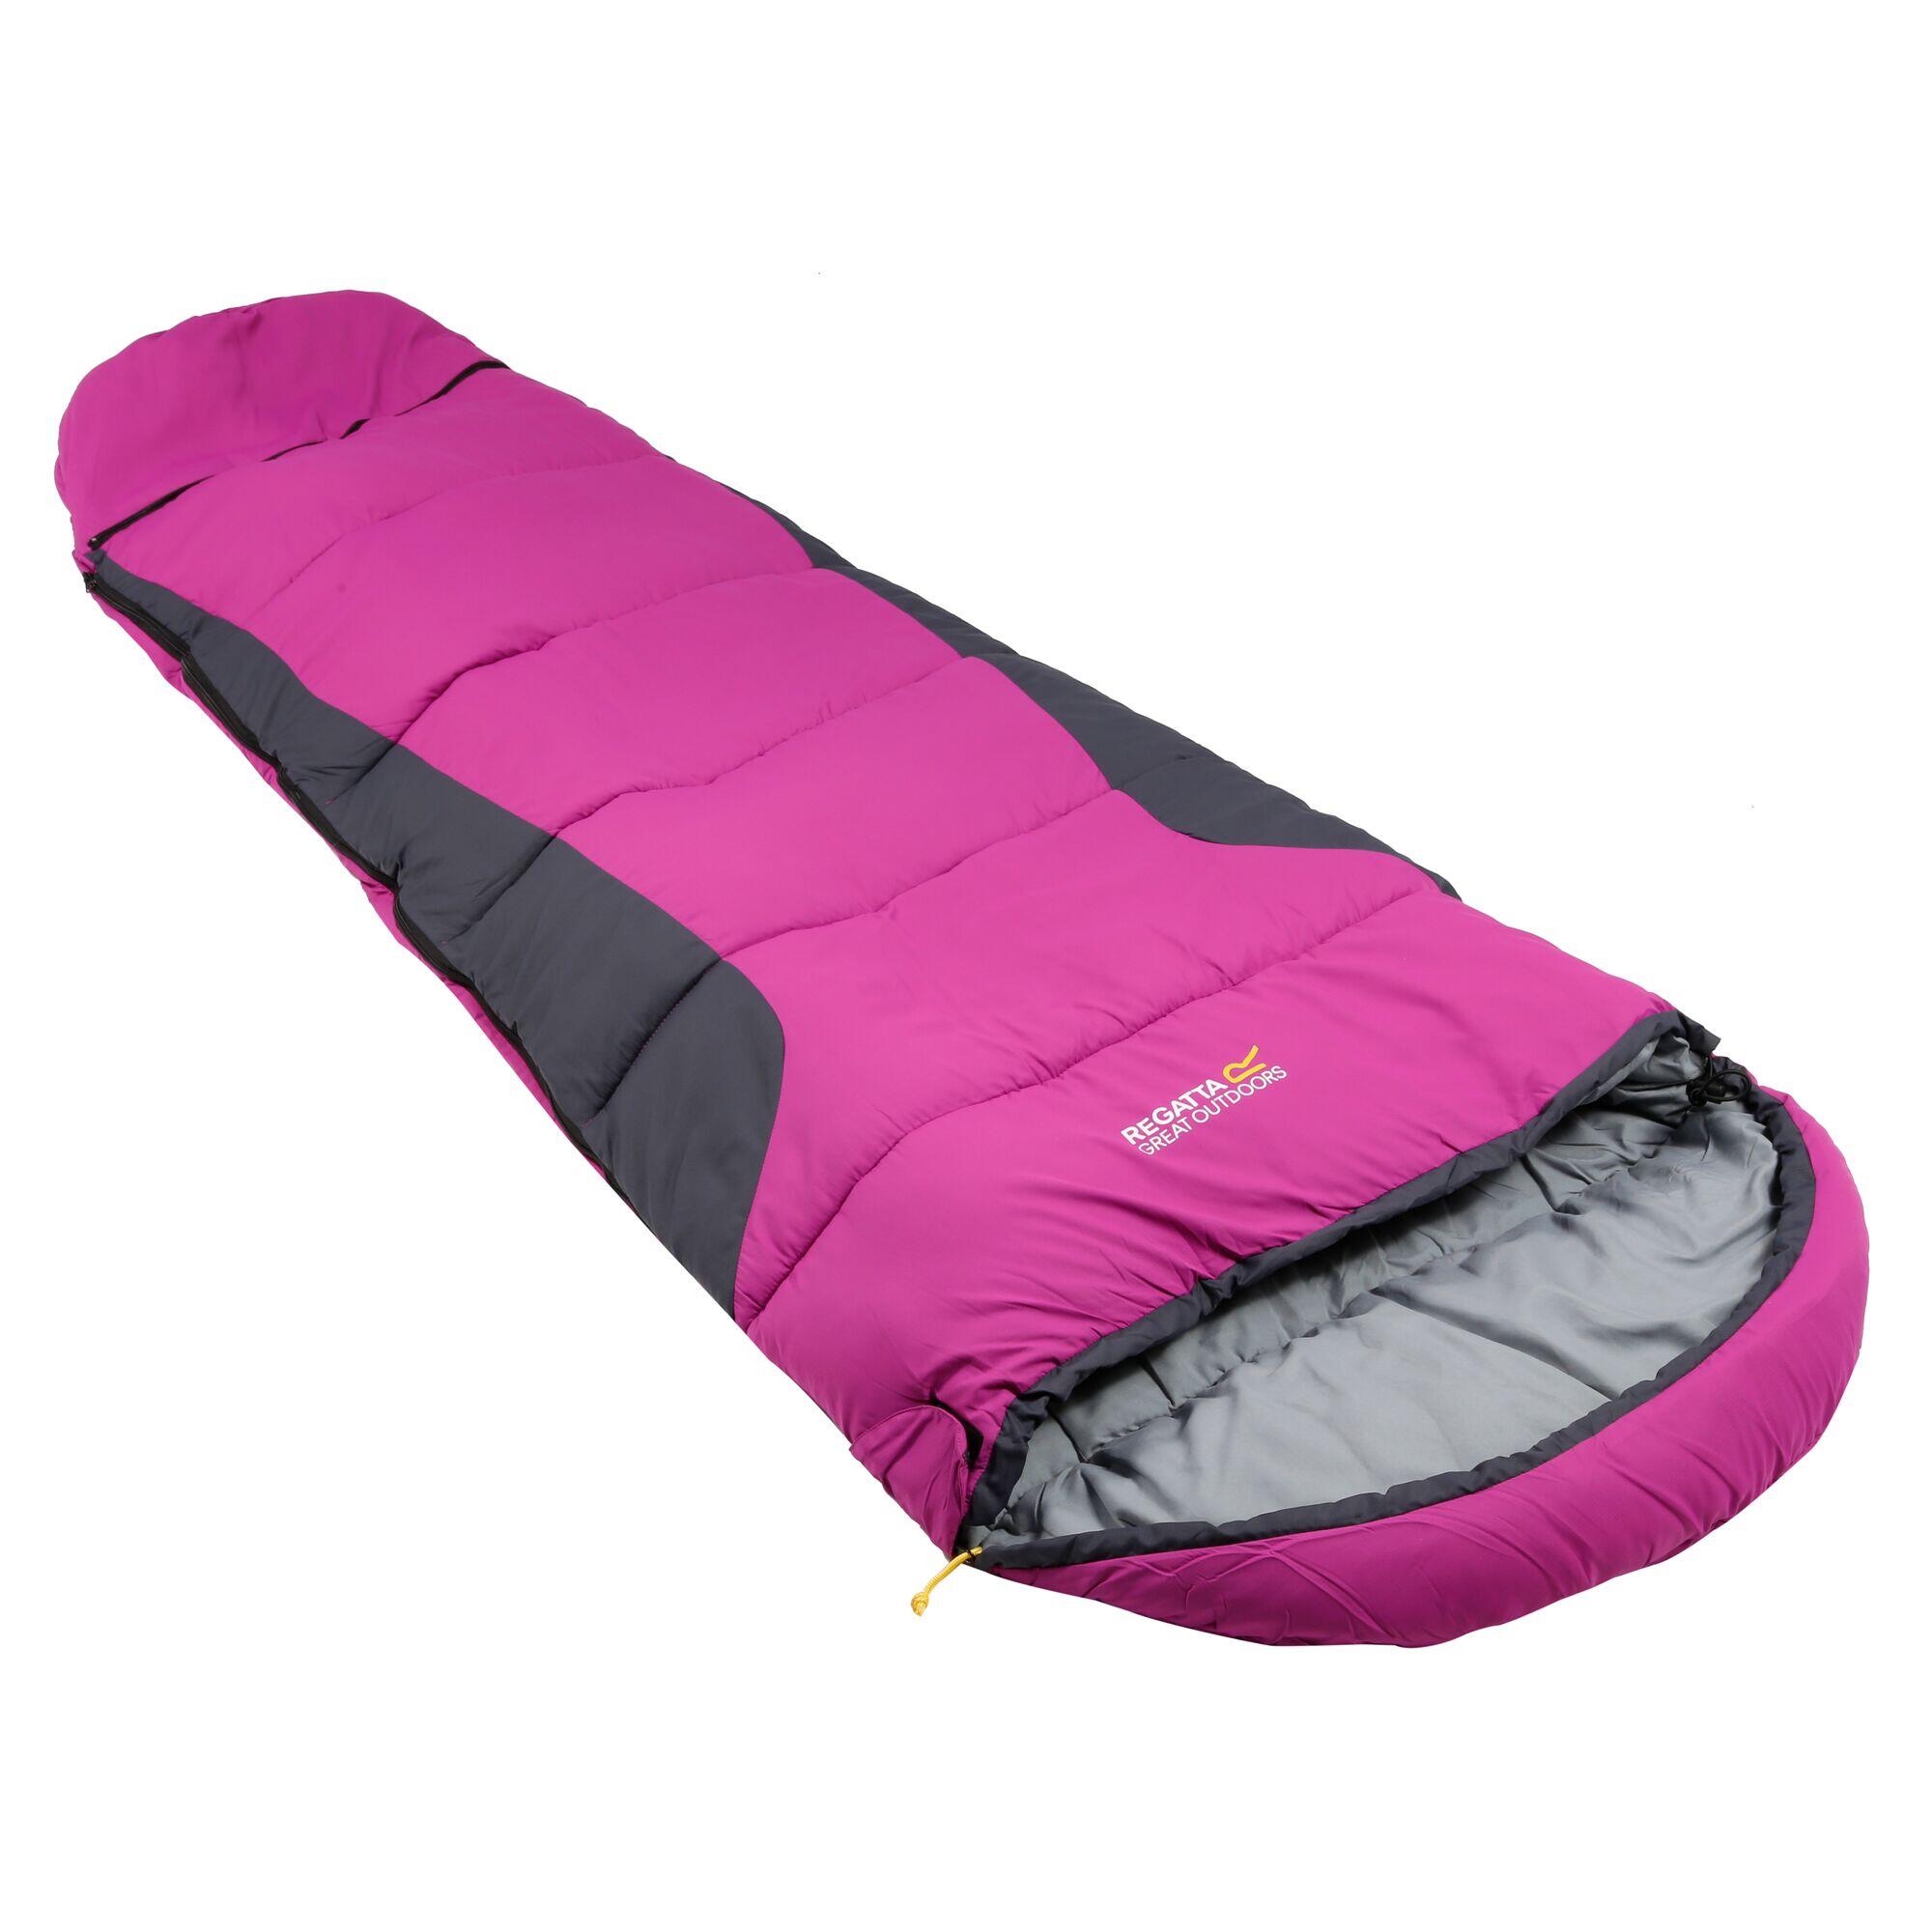 Sleeping Bags For Adults  Kids  Camping  Decathlon